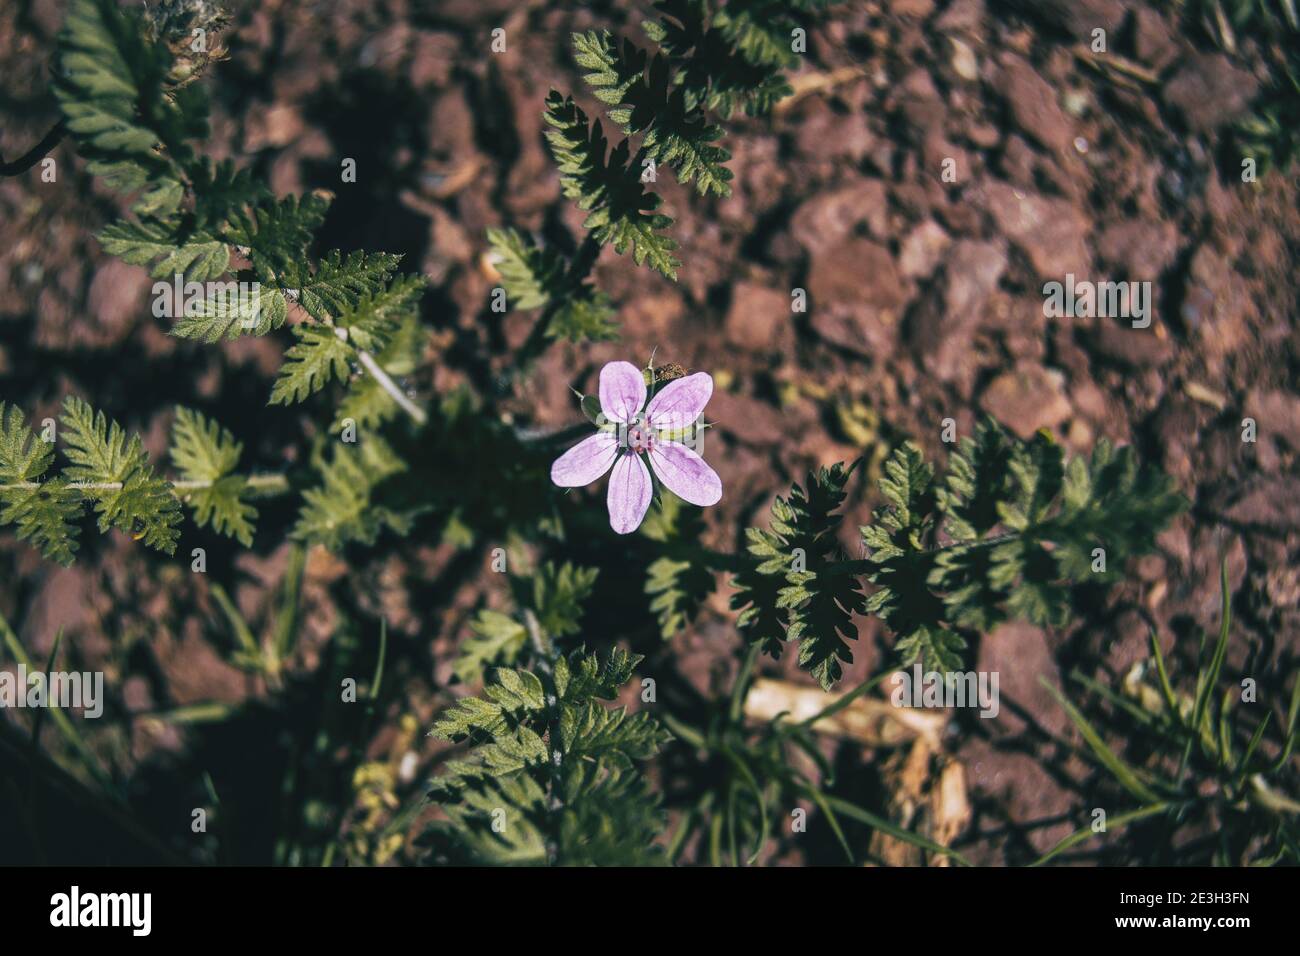 small lilac erodium flower on the ground of a field Stock Photo